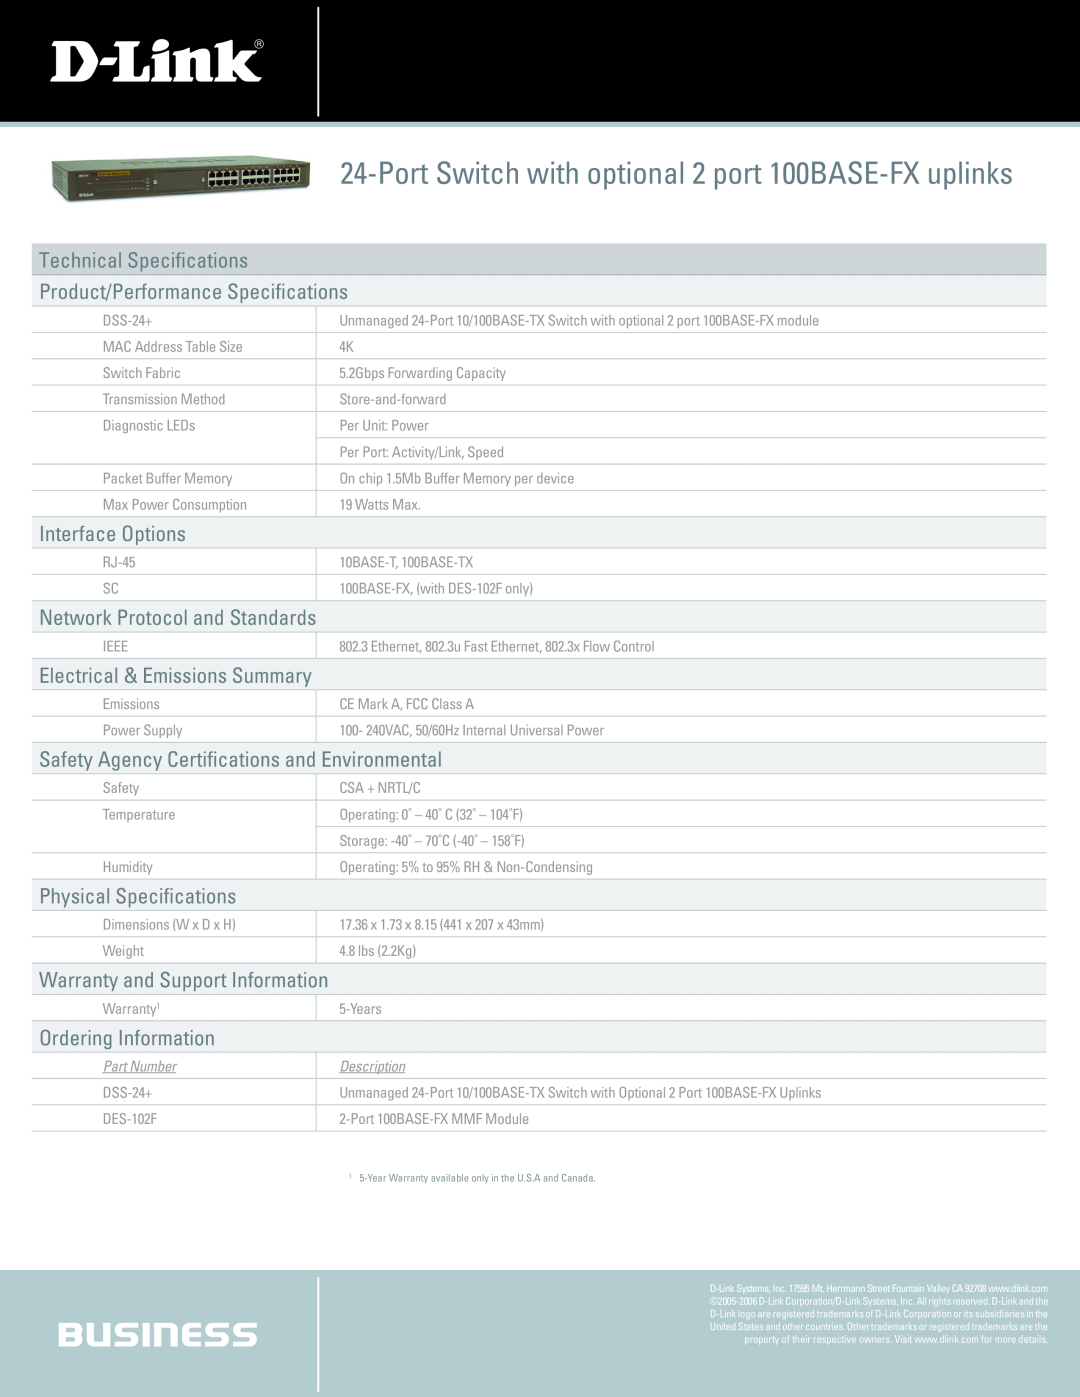 D-Link DSS-24+ Technical Specifications Product/Performance Specifications, Interface Options, Physical Specifications 